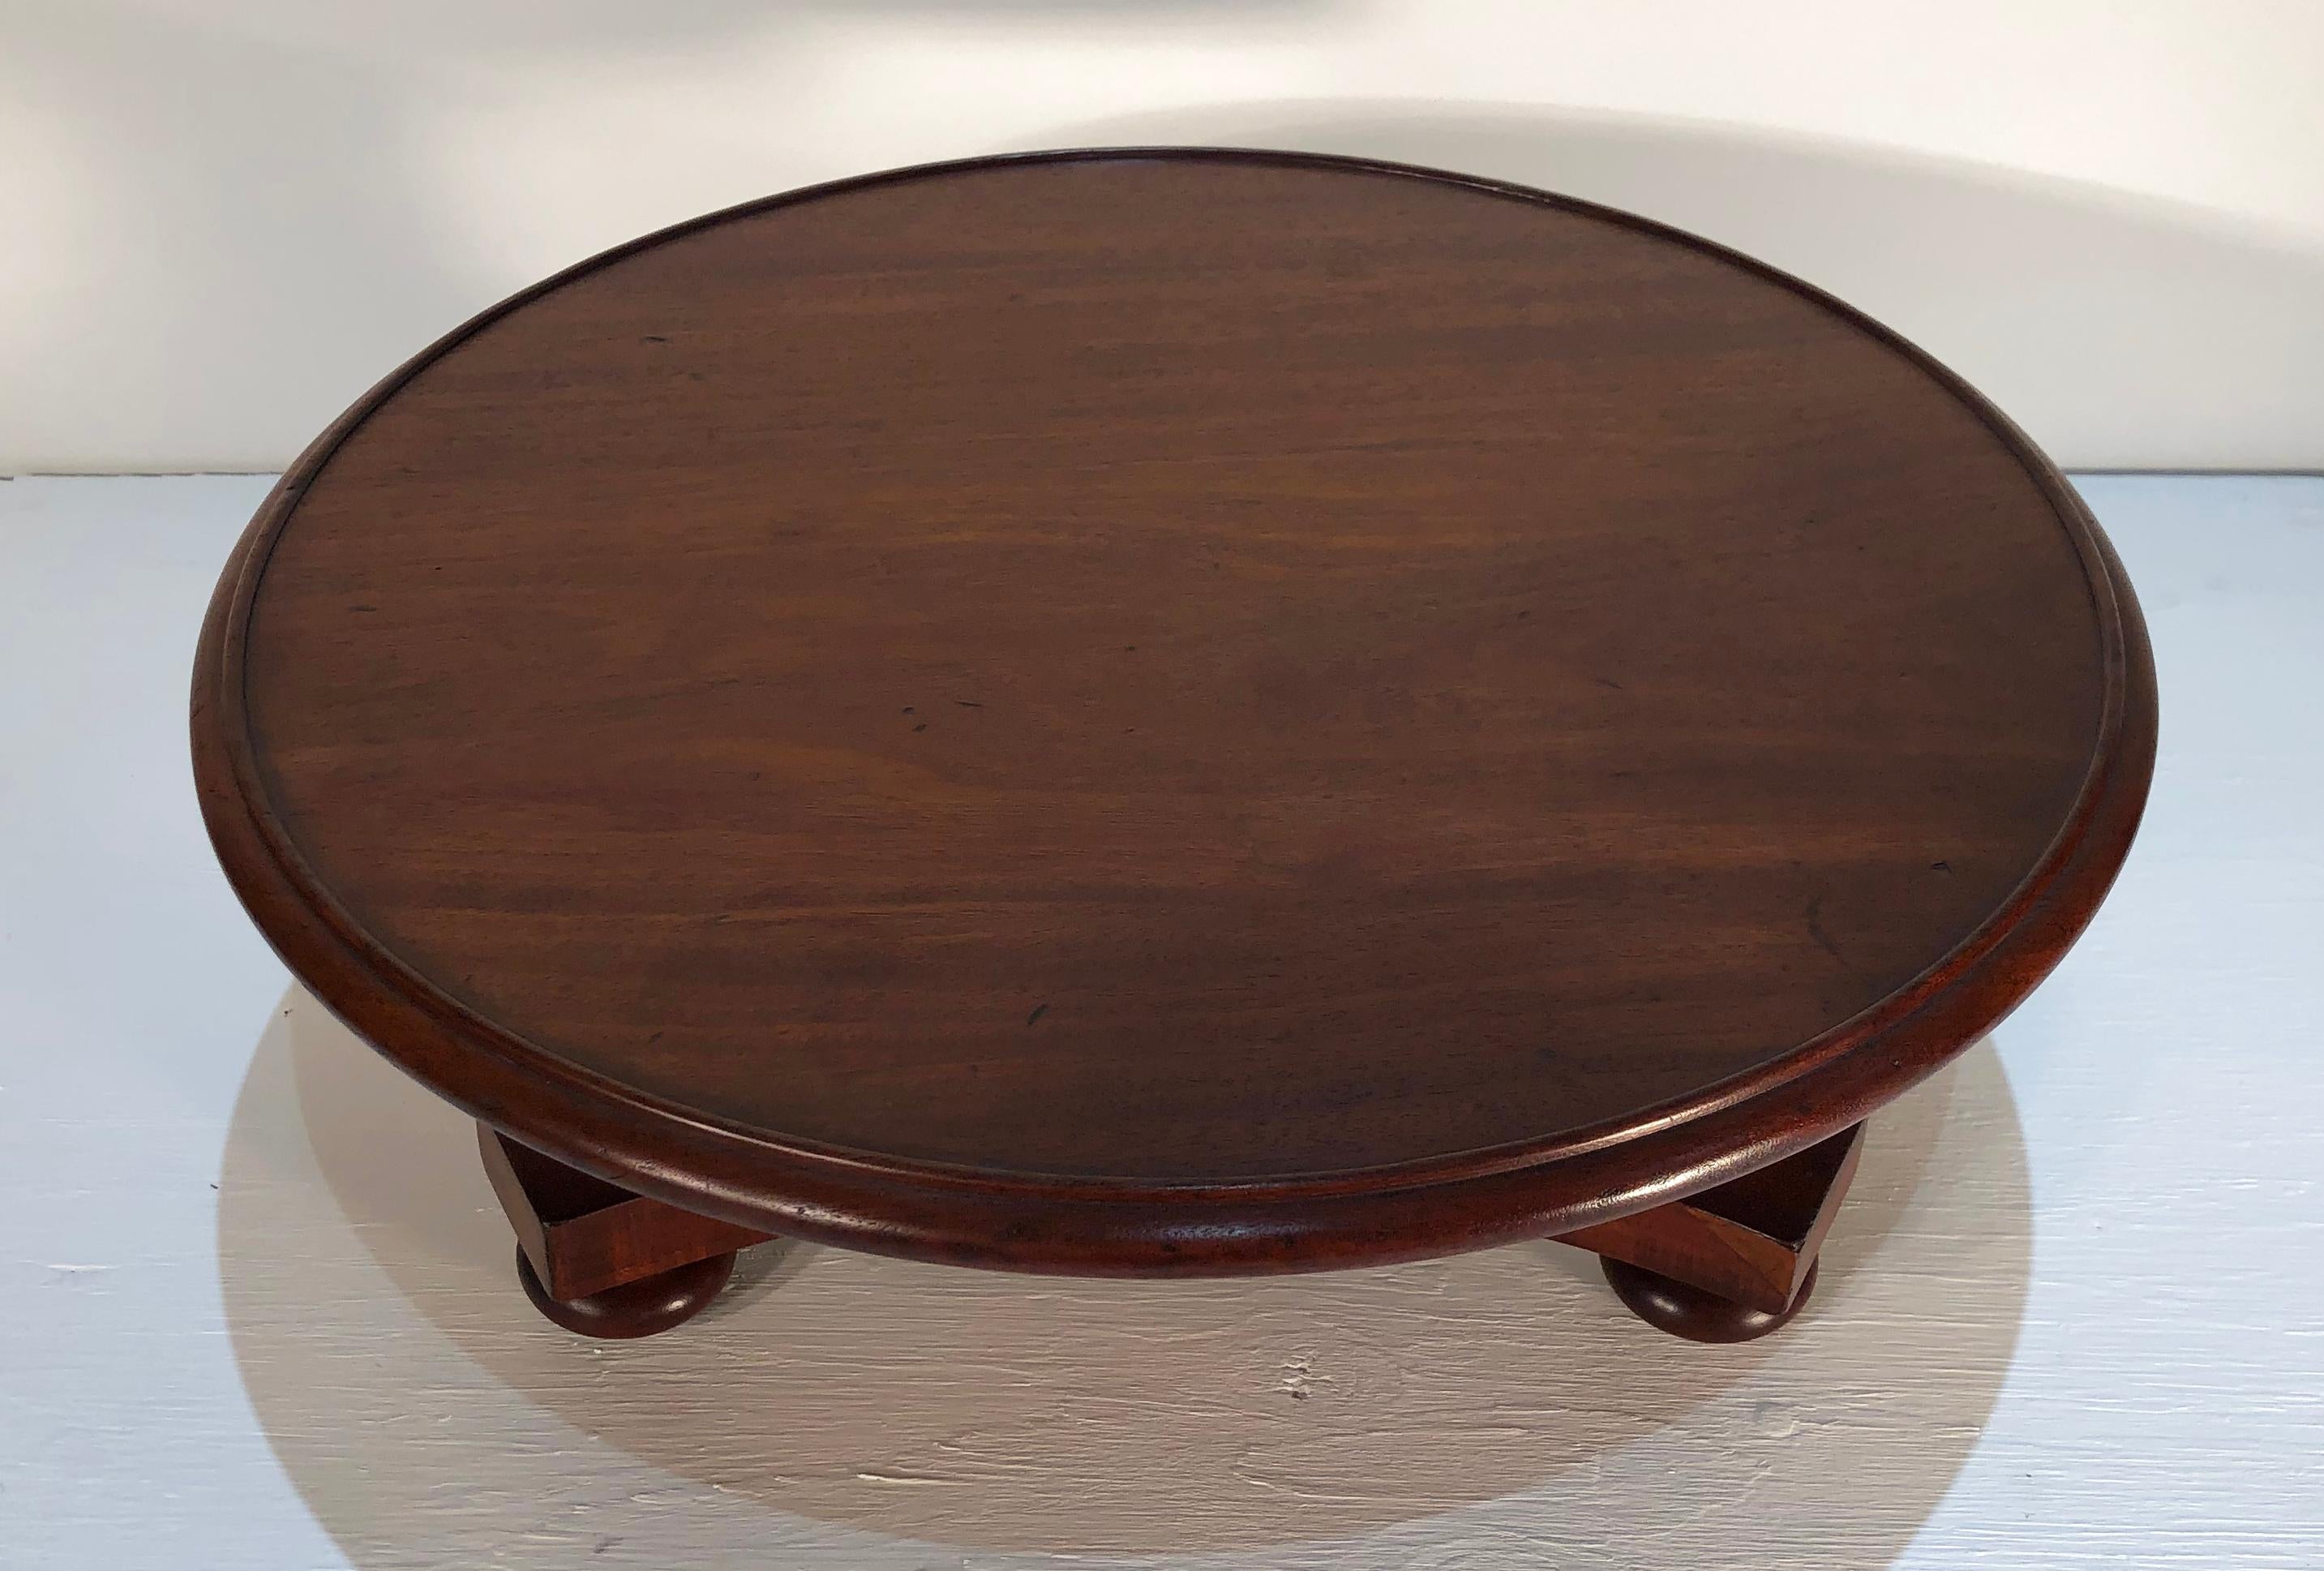 Rare 19th century West Indies Lazy Susan made of mahogany, Regency in style. Wonderful tripartite base with central column and reeded collar.